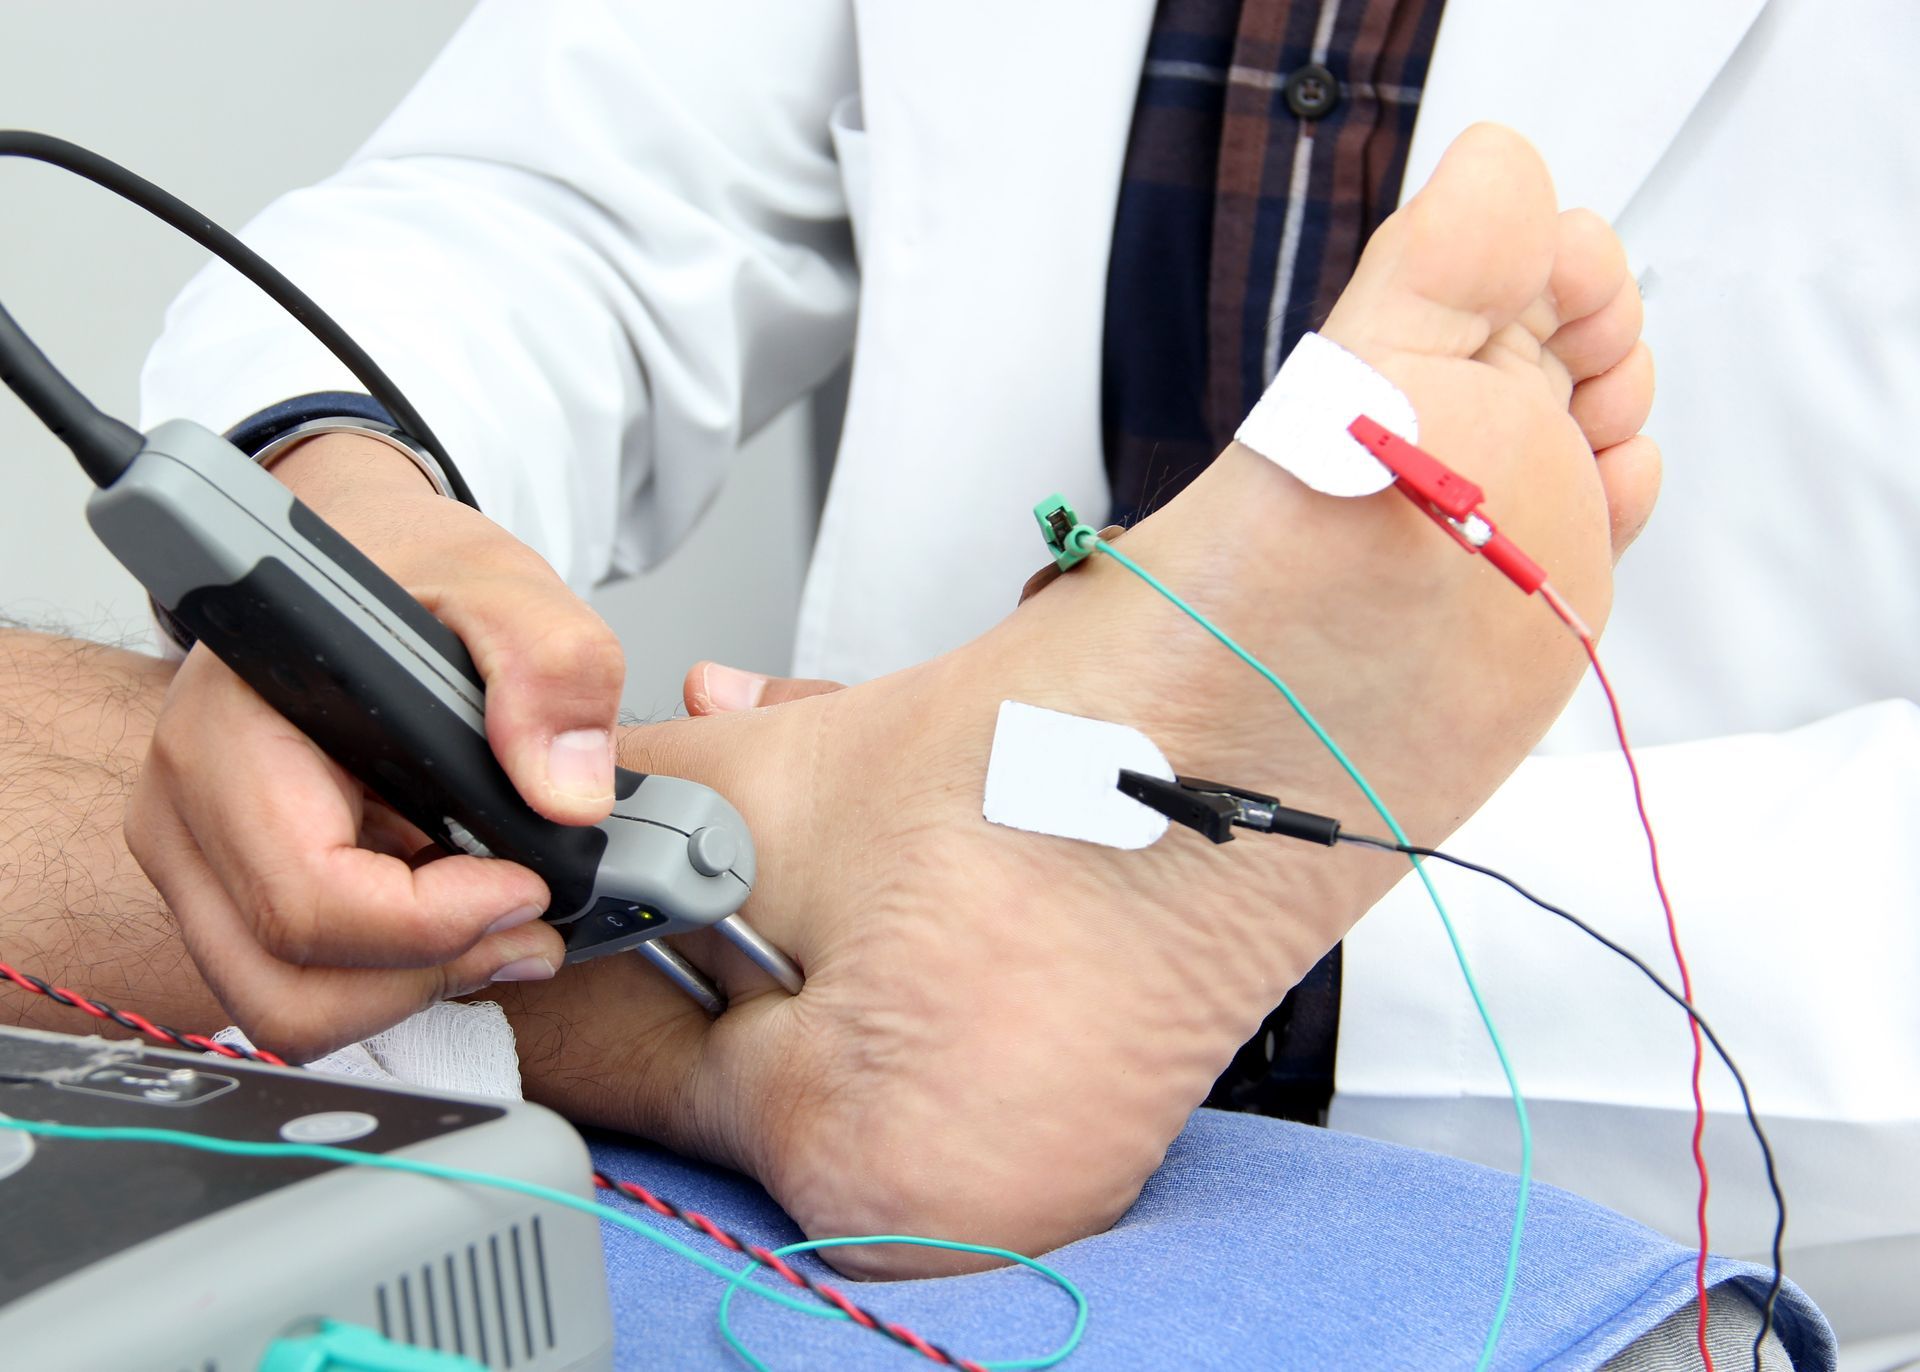 A doctor is examining a patient 's foot with electrodes attached to it